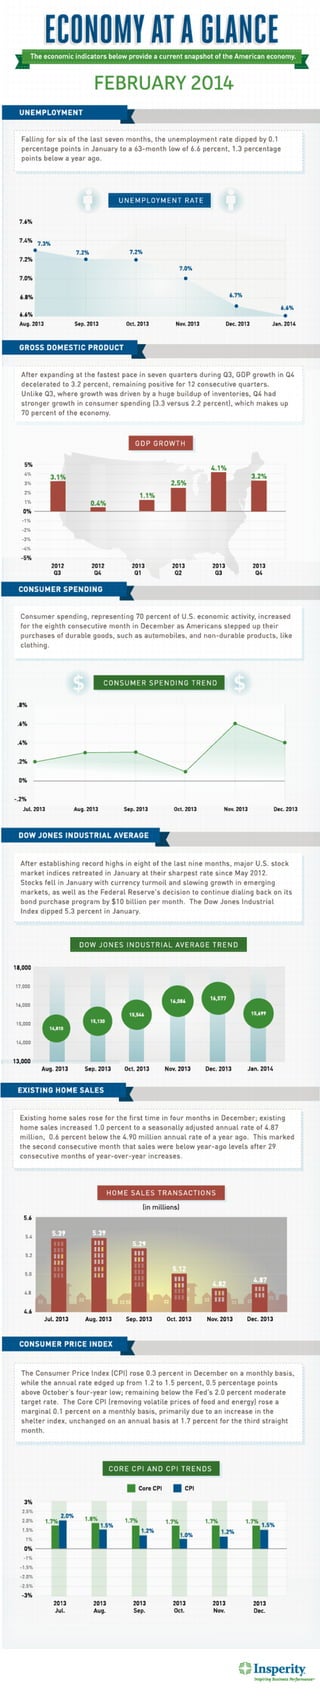 Economy at a Glance: February 2014 [Infographic]